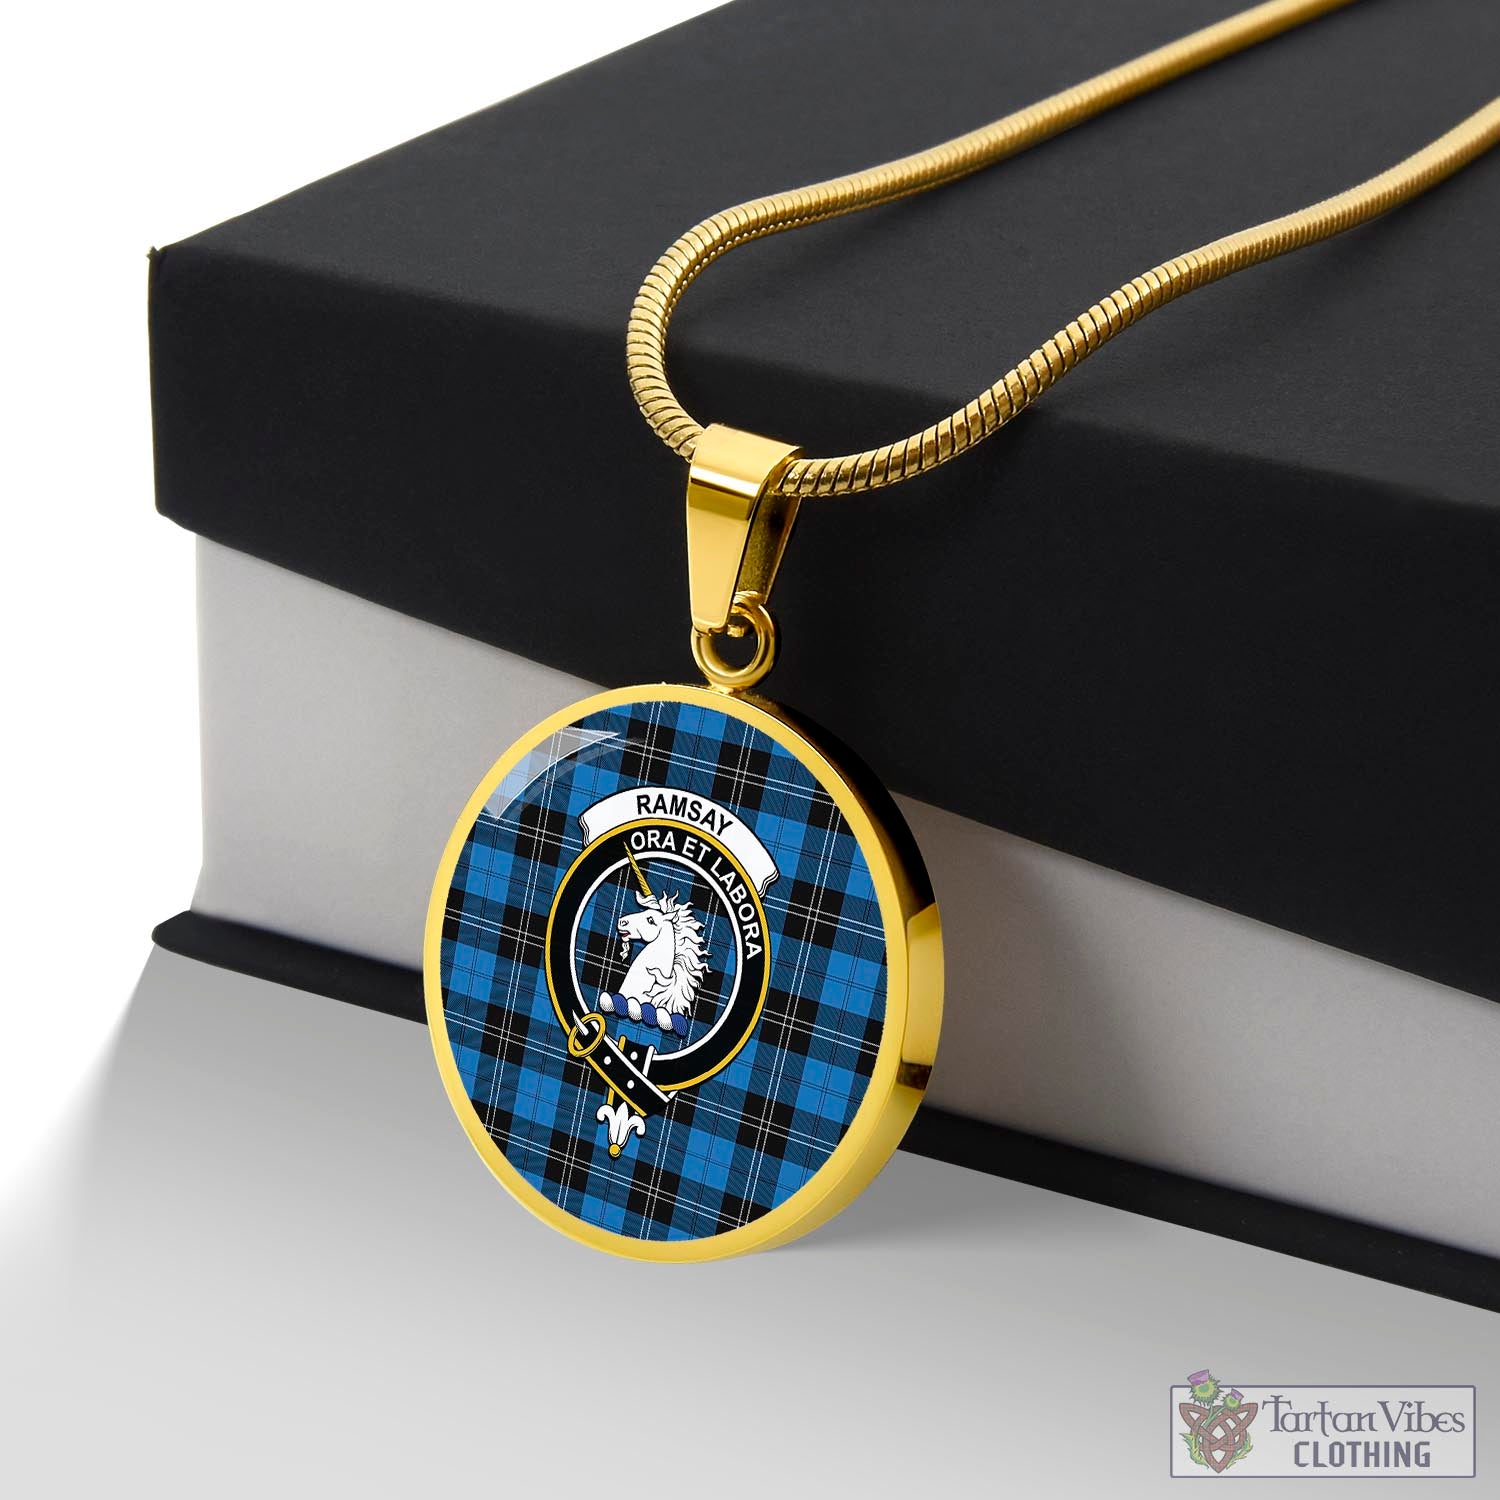 Tartan Vibes Clothing Ramsay Blue Ancient Tartan Circle Necklace with Family Crest